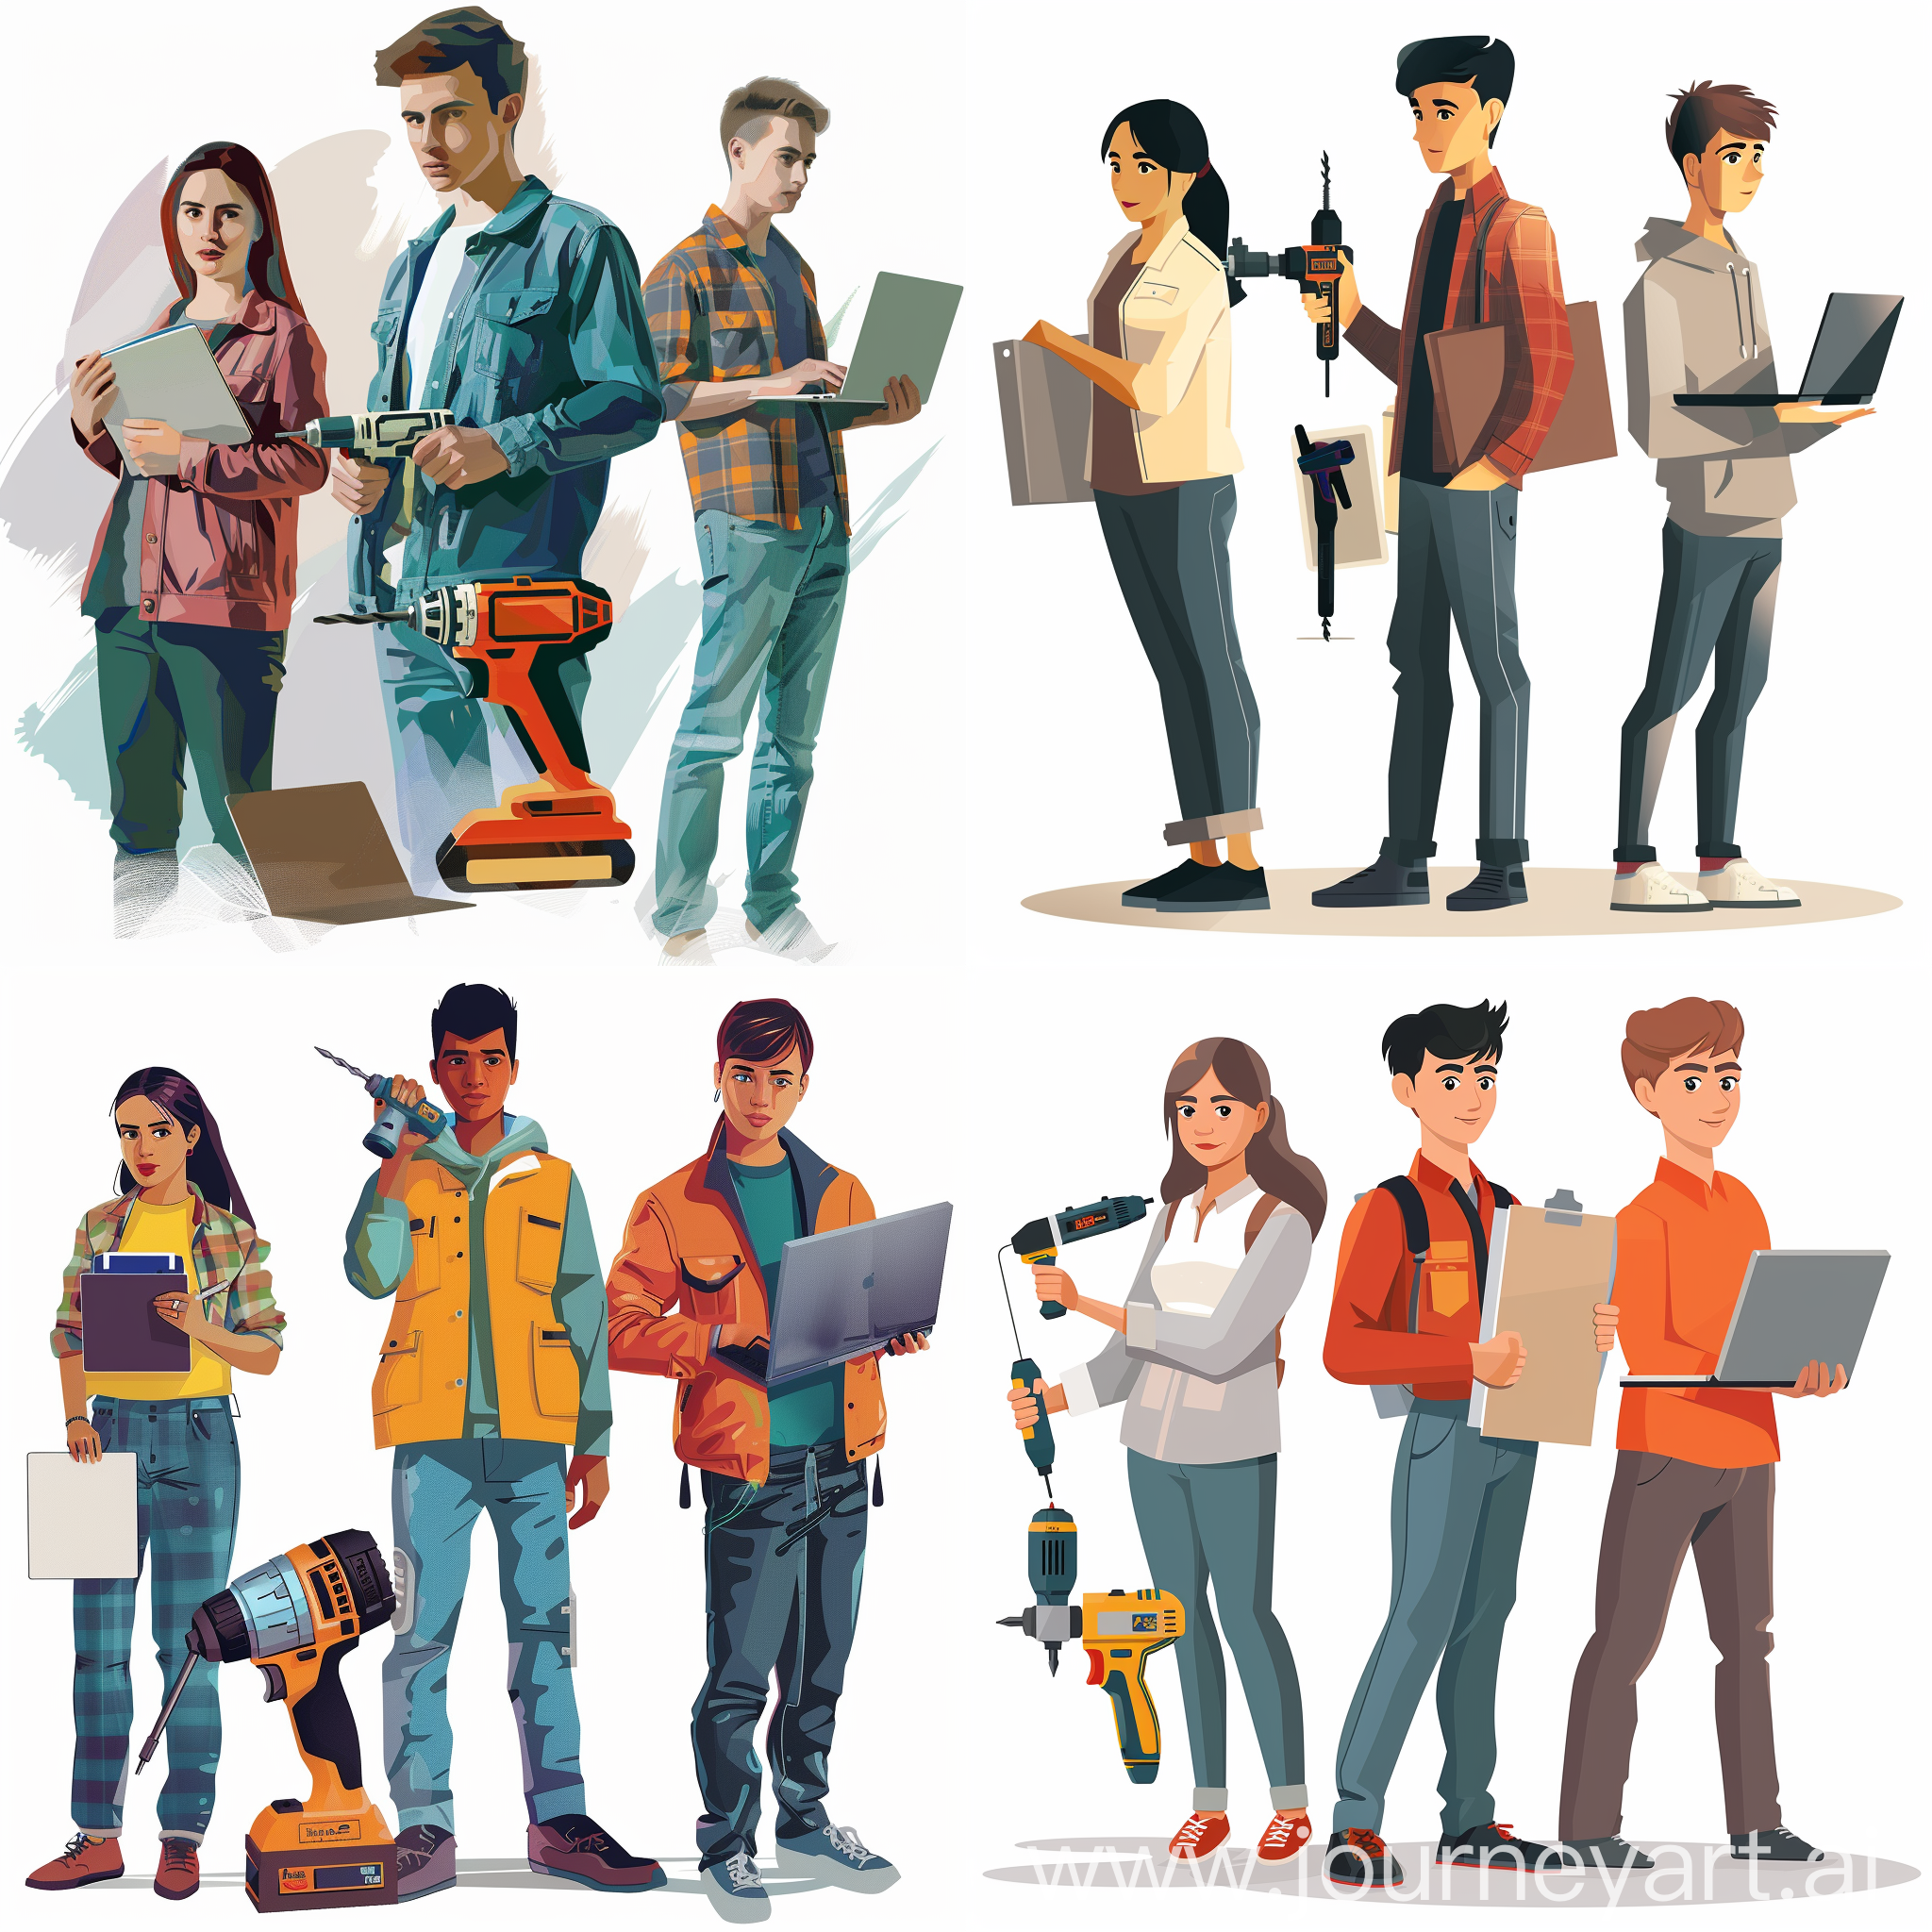 Depict 3 of people of different professions, first is a men with drill in his hands in front.
The second is woman on the left side with a folder.
The third is a young guy on the right with laptop in his hands. Digital Art.